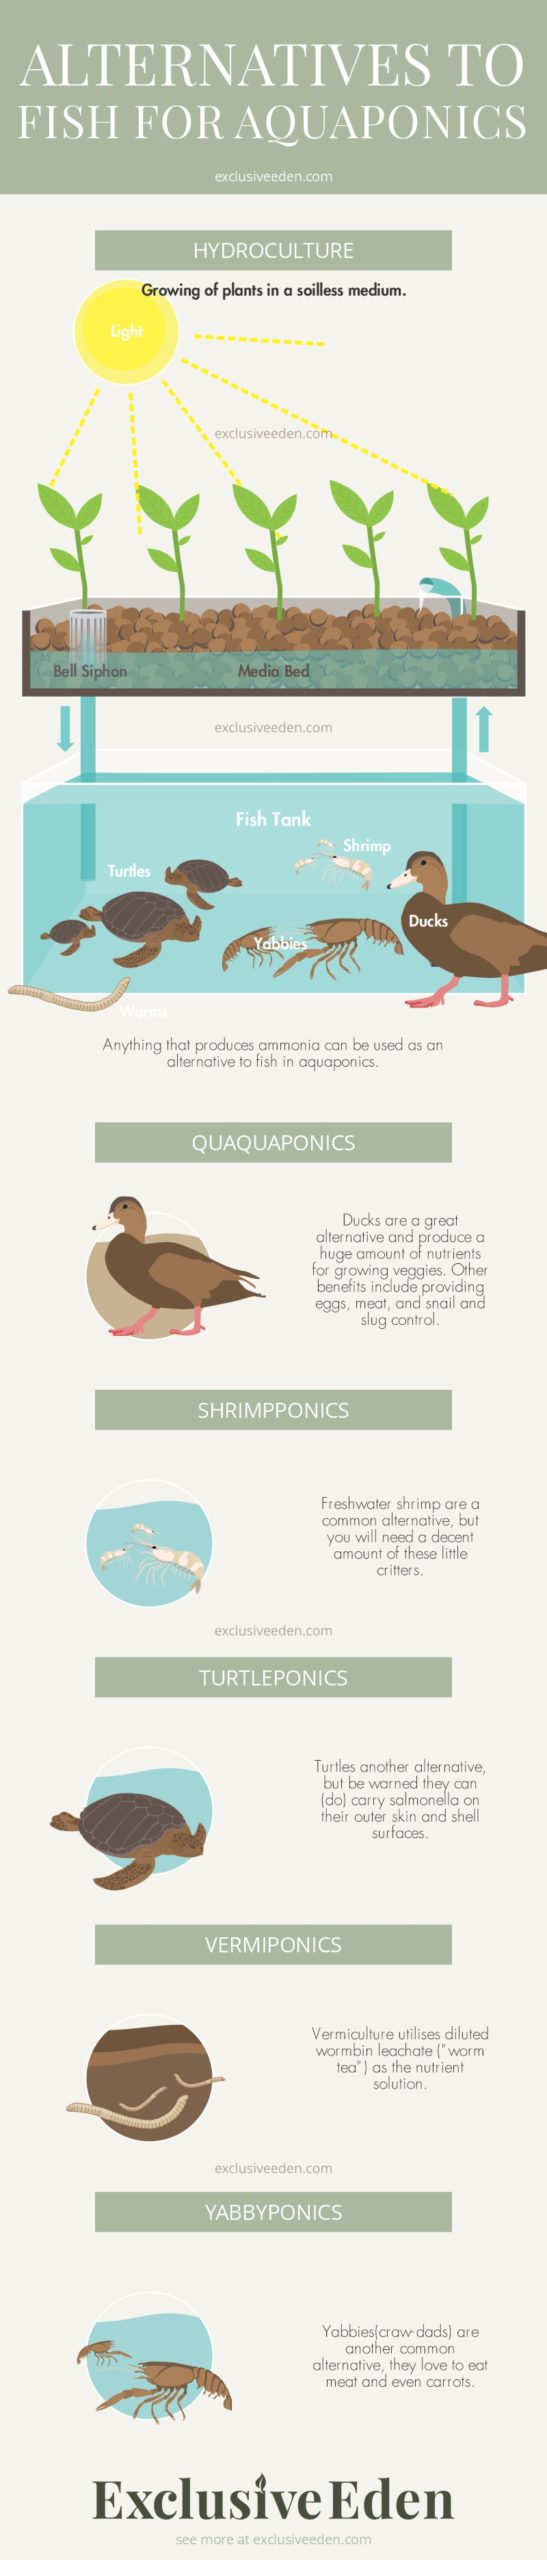 Infographic on some alternatives to fish for aquaponics.